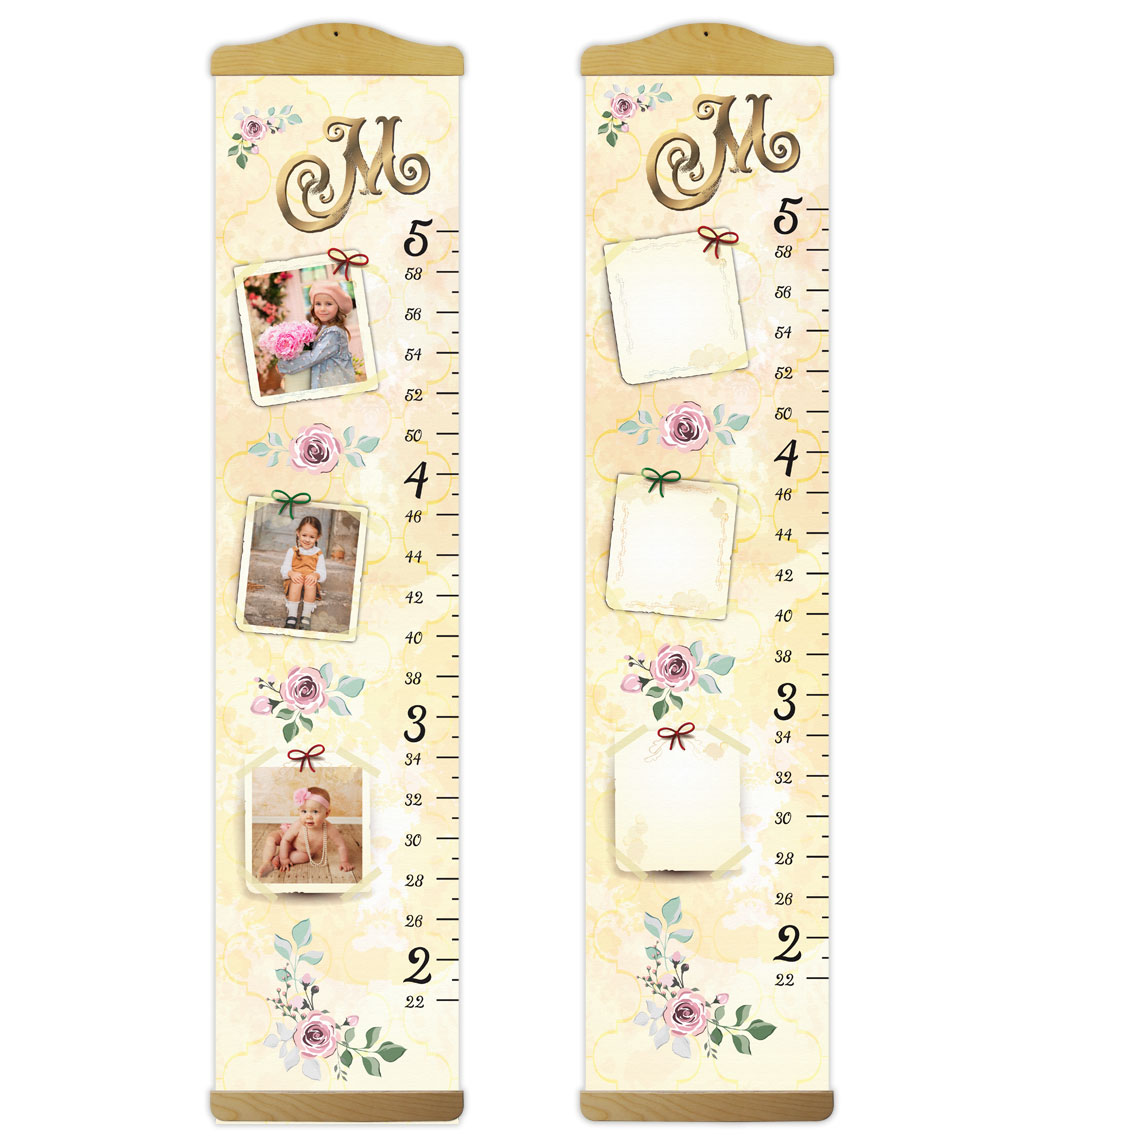 Floral Design Growth Chart with Personalized Photos